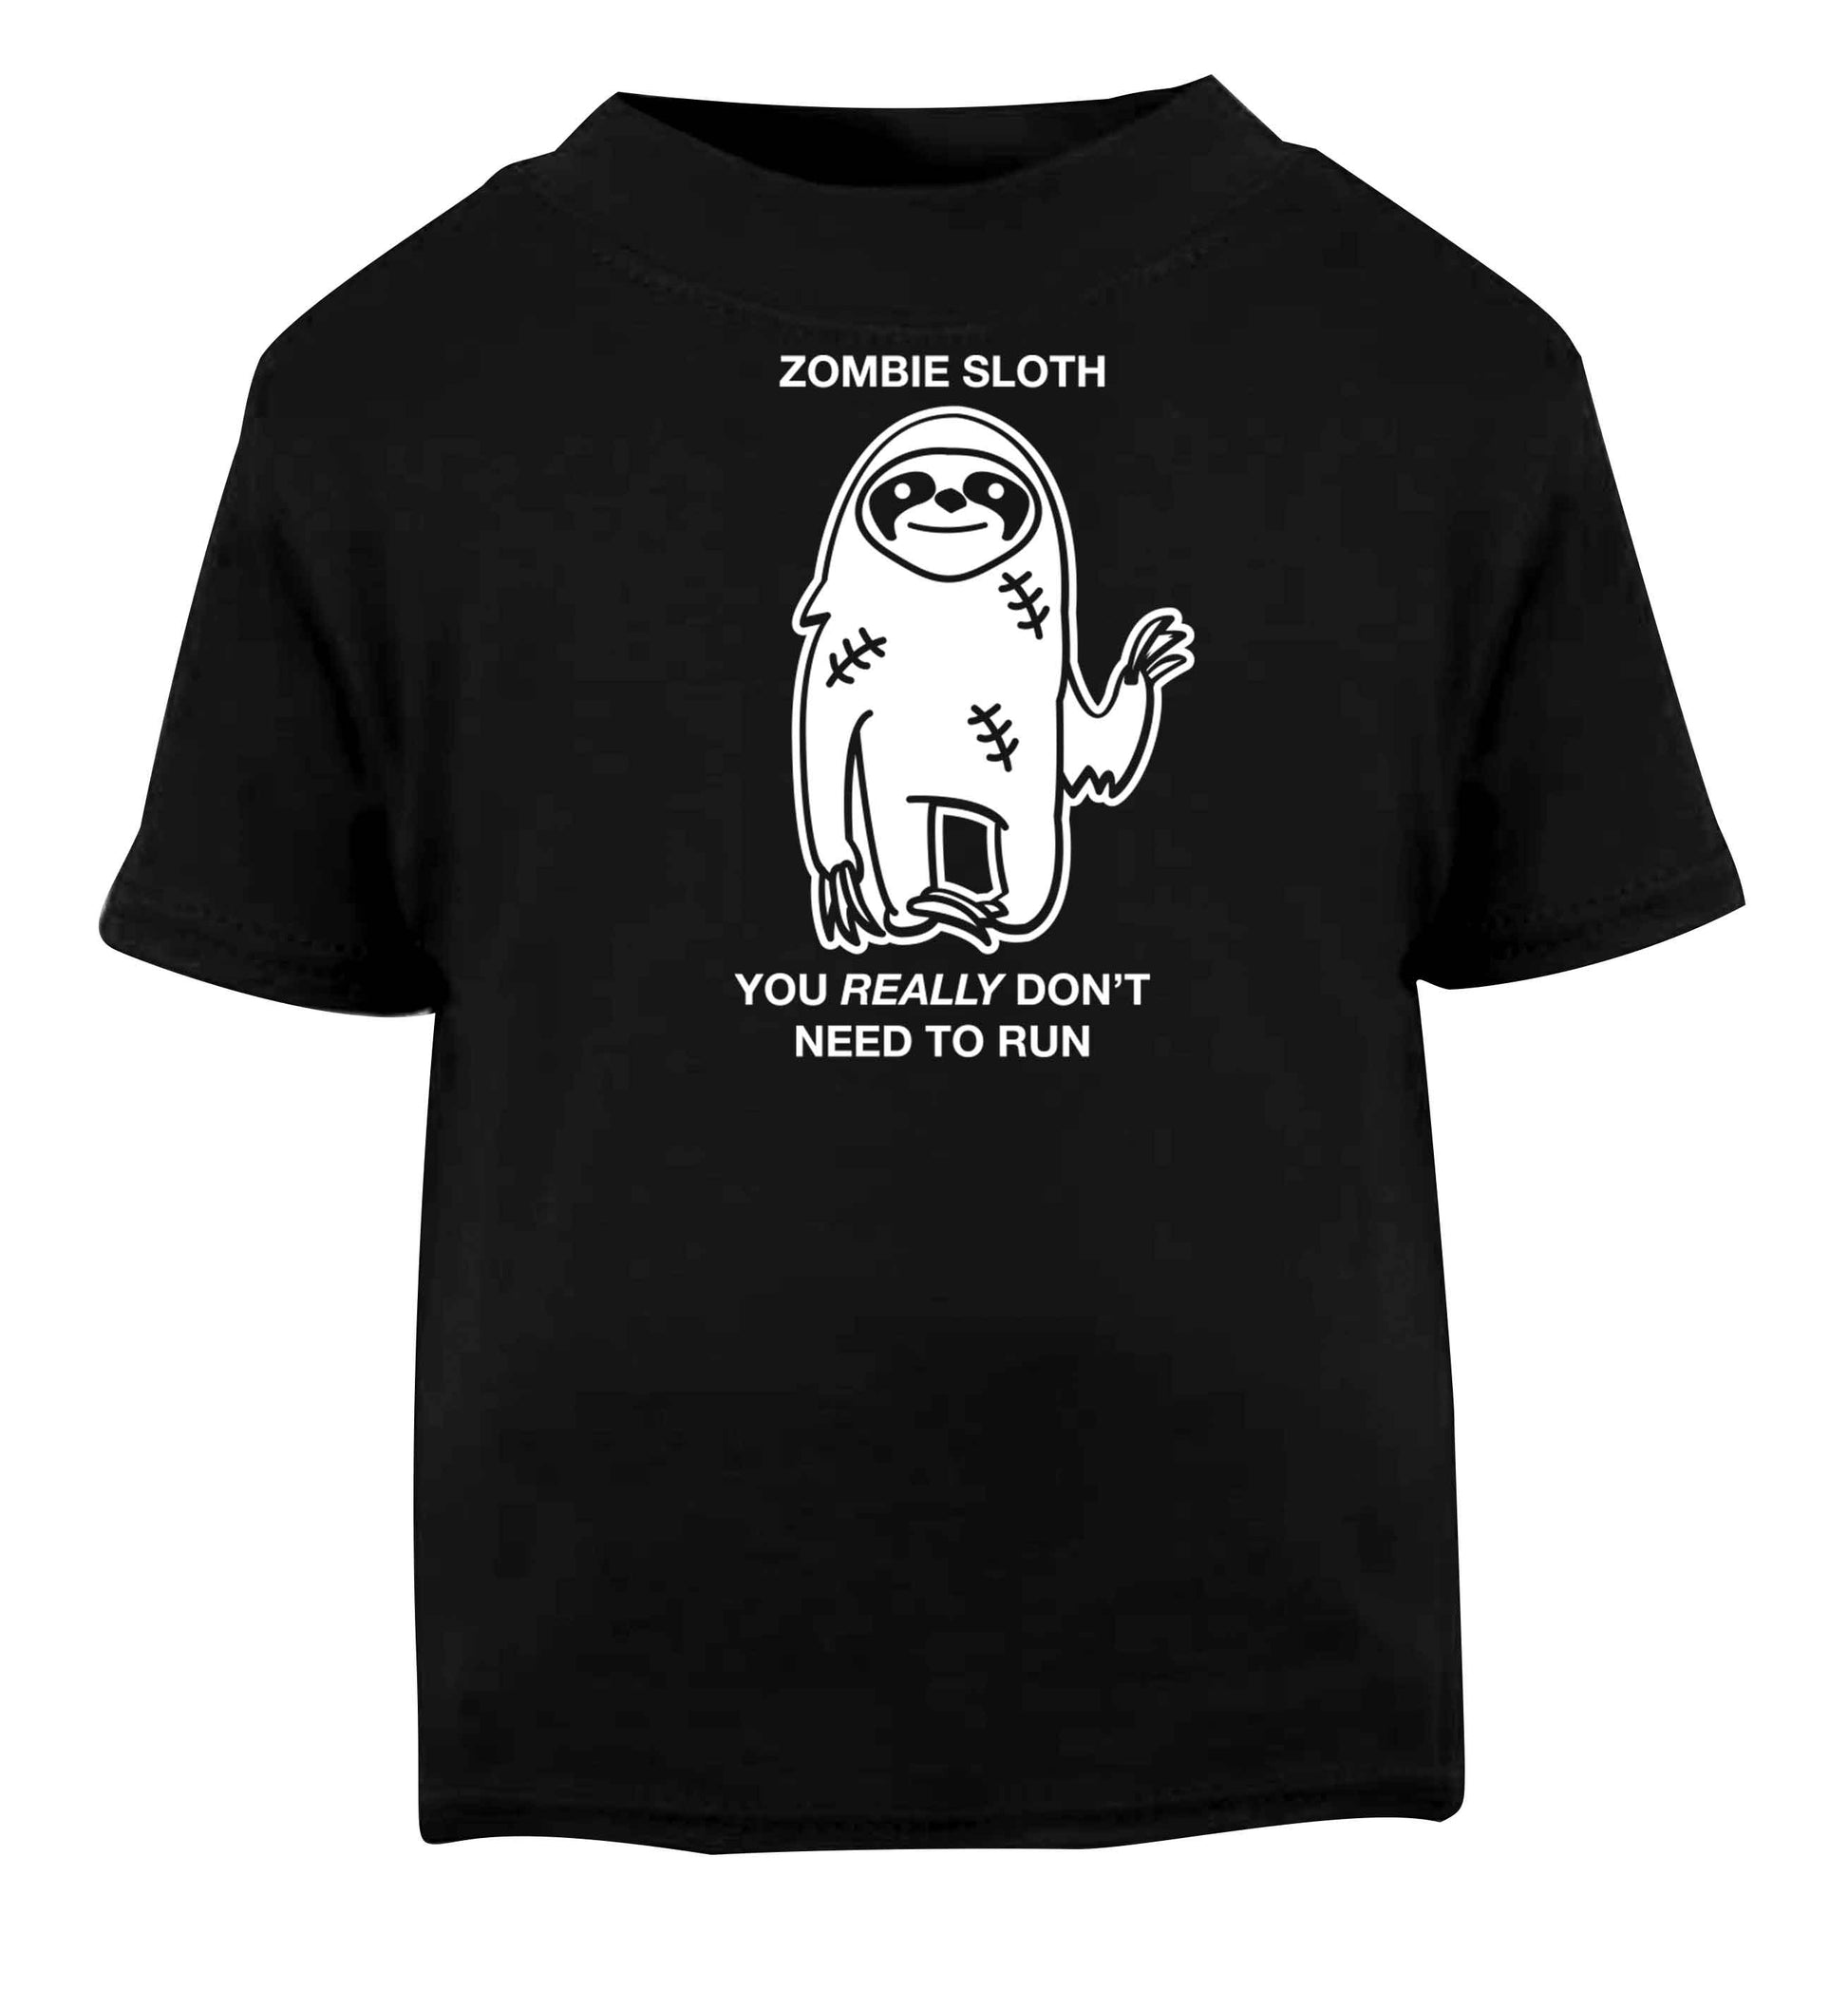 Zombie sloth you really don't need to run Black baby toddler Tshirt 2 years